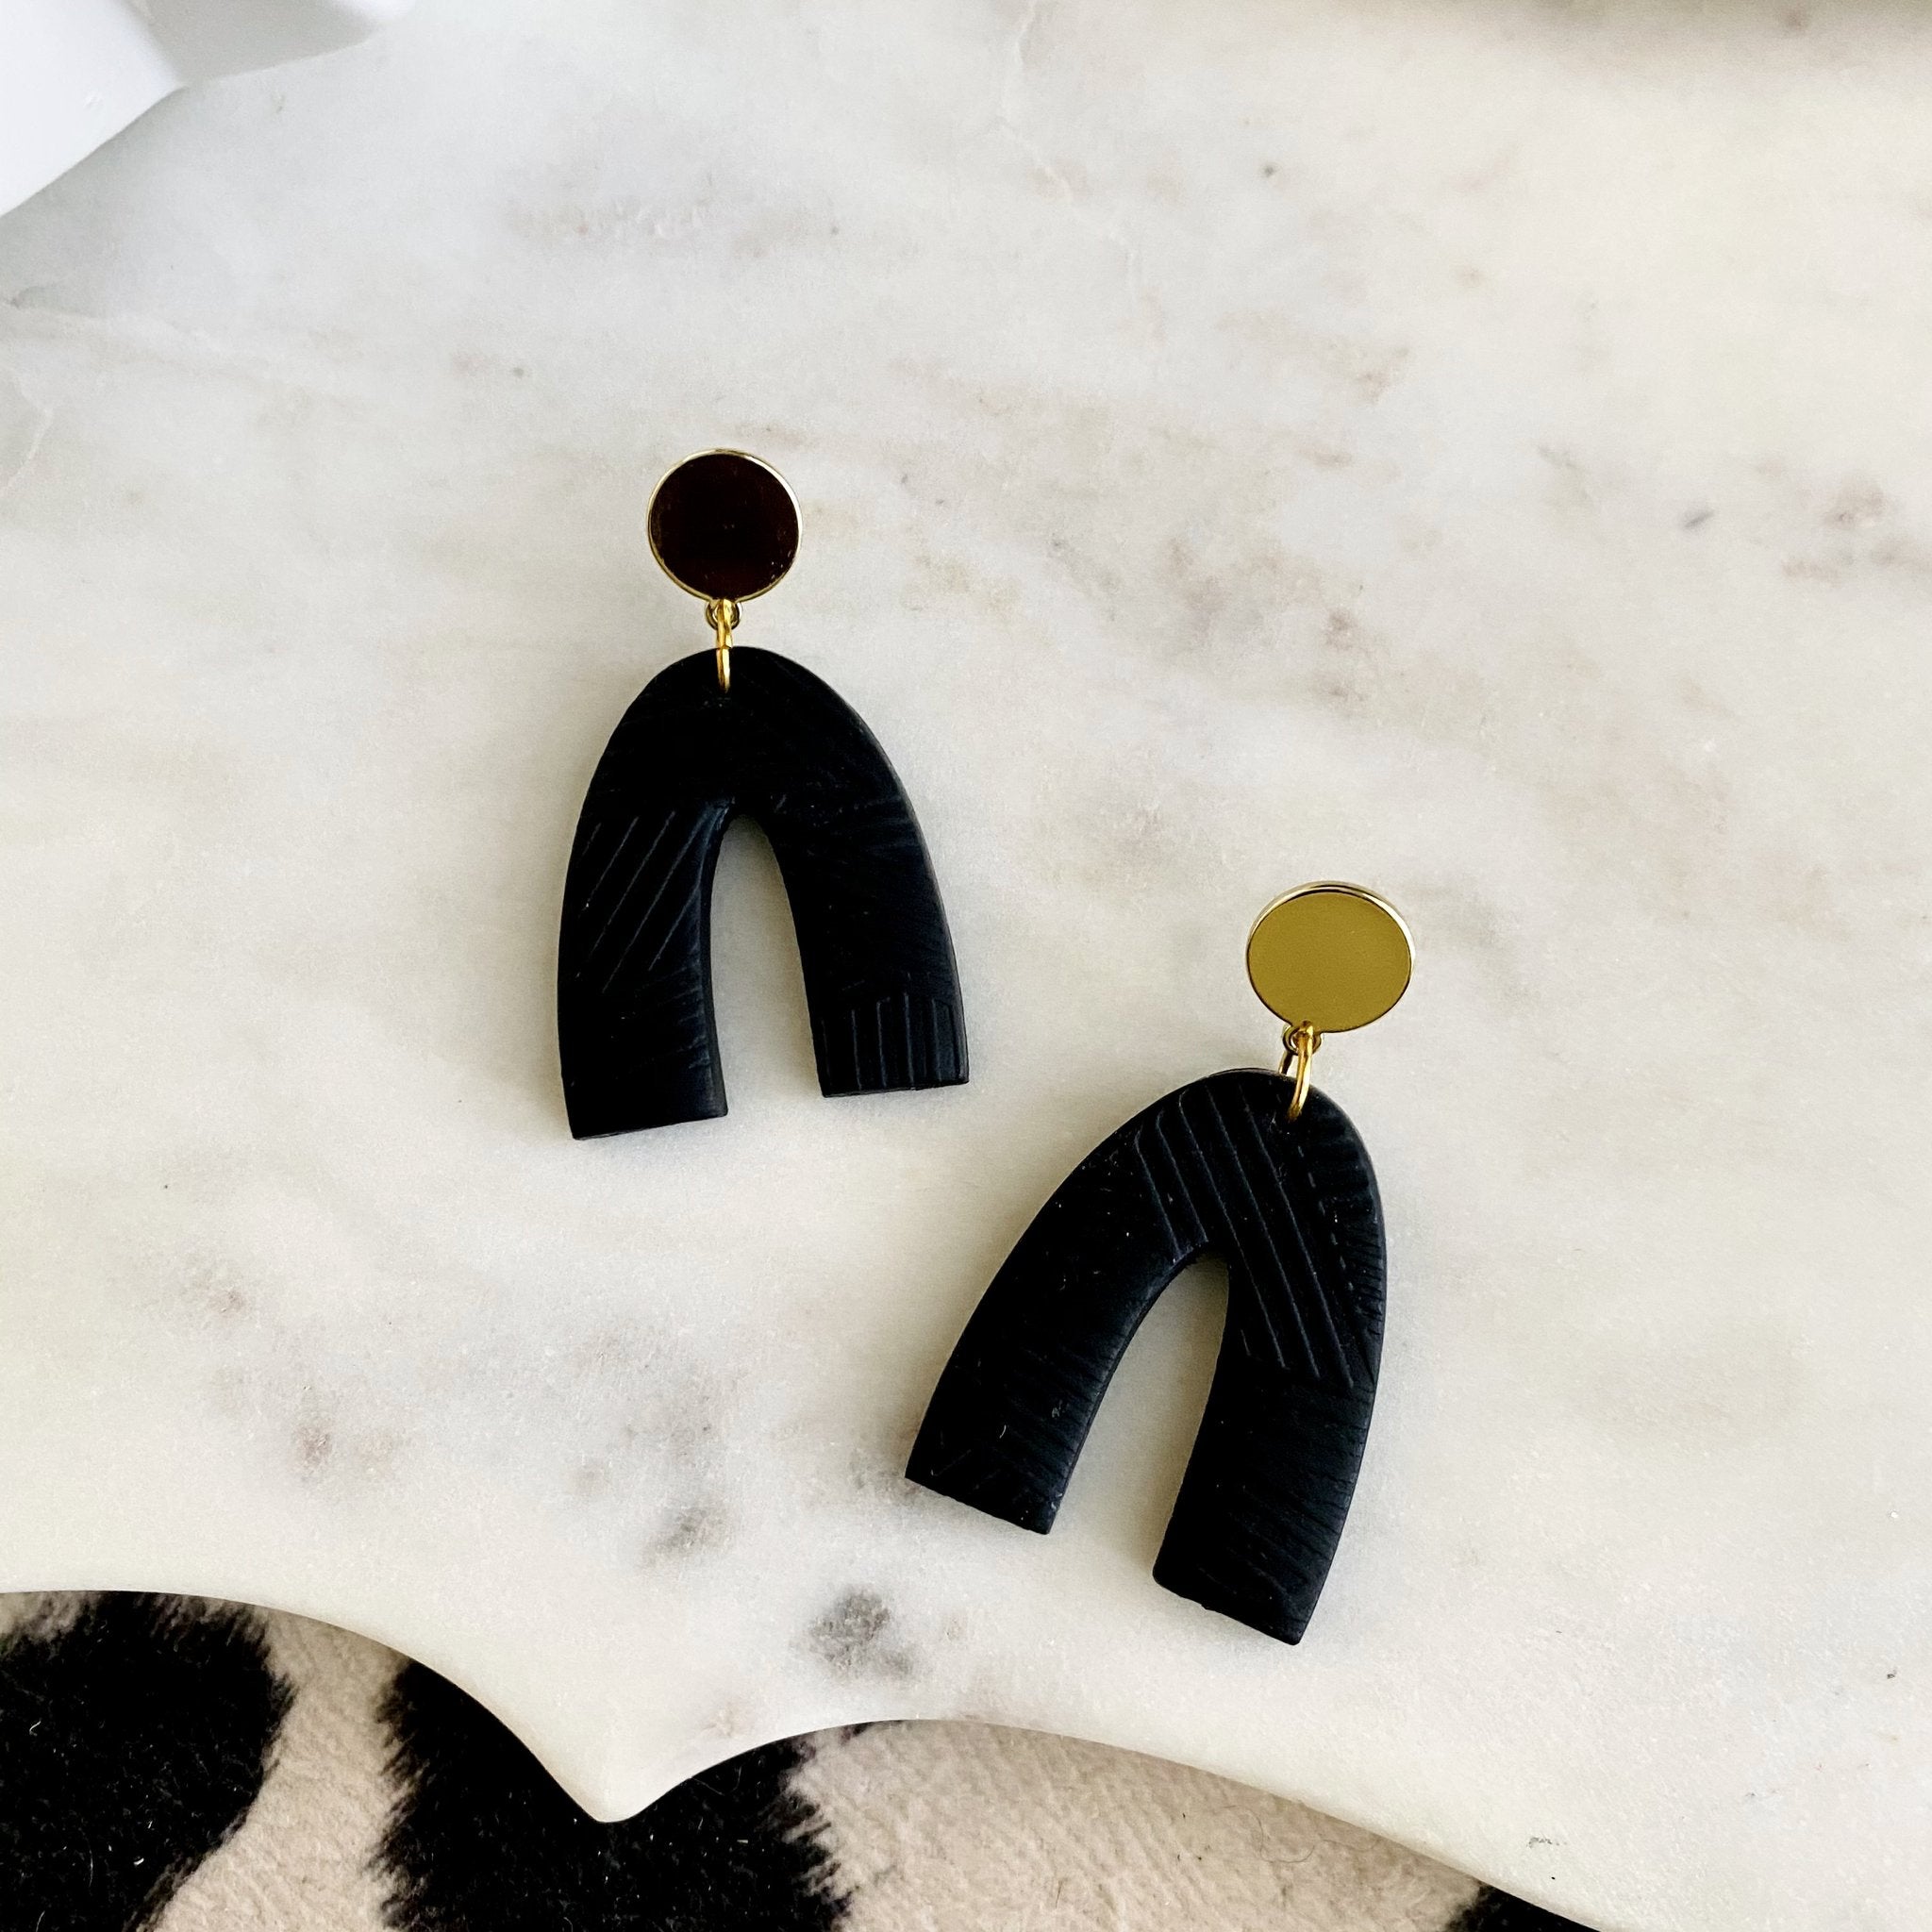 br design co black textured arch earrings